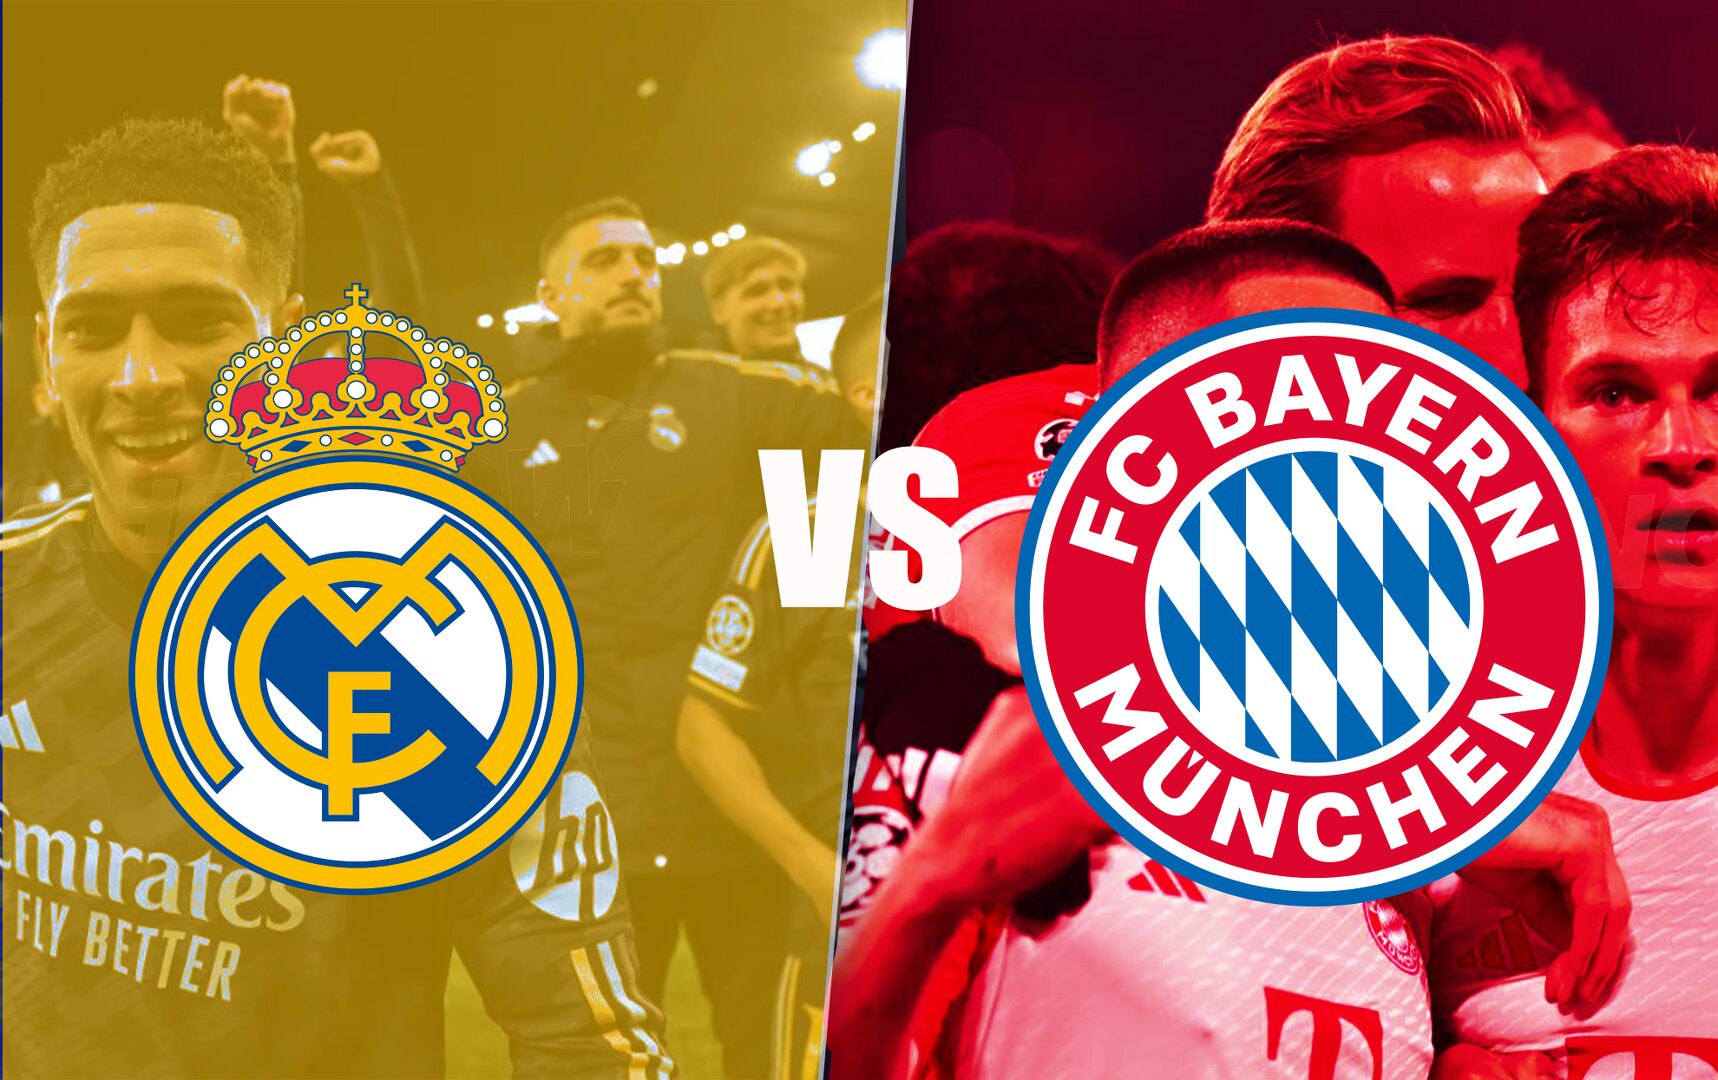 Real Madrid vs Bayern Munich Live streaming, TV channel, kickoff time